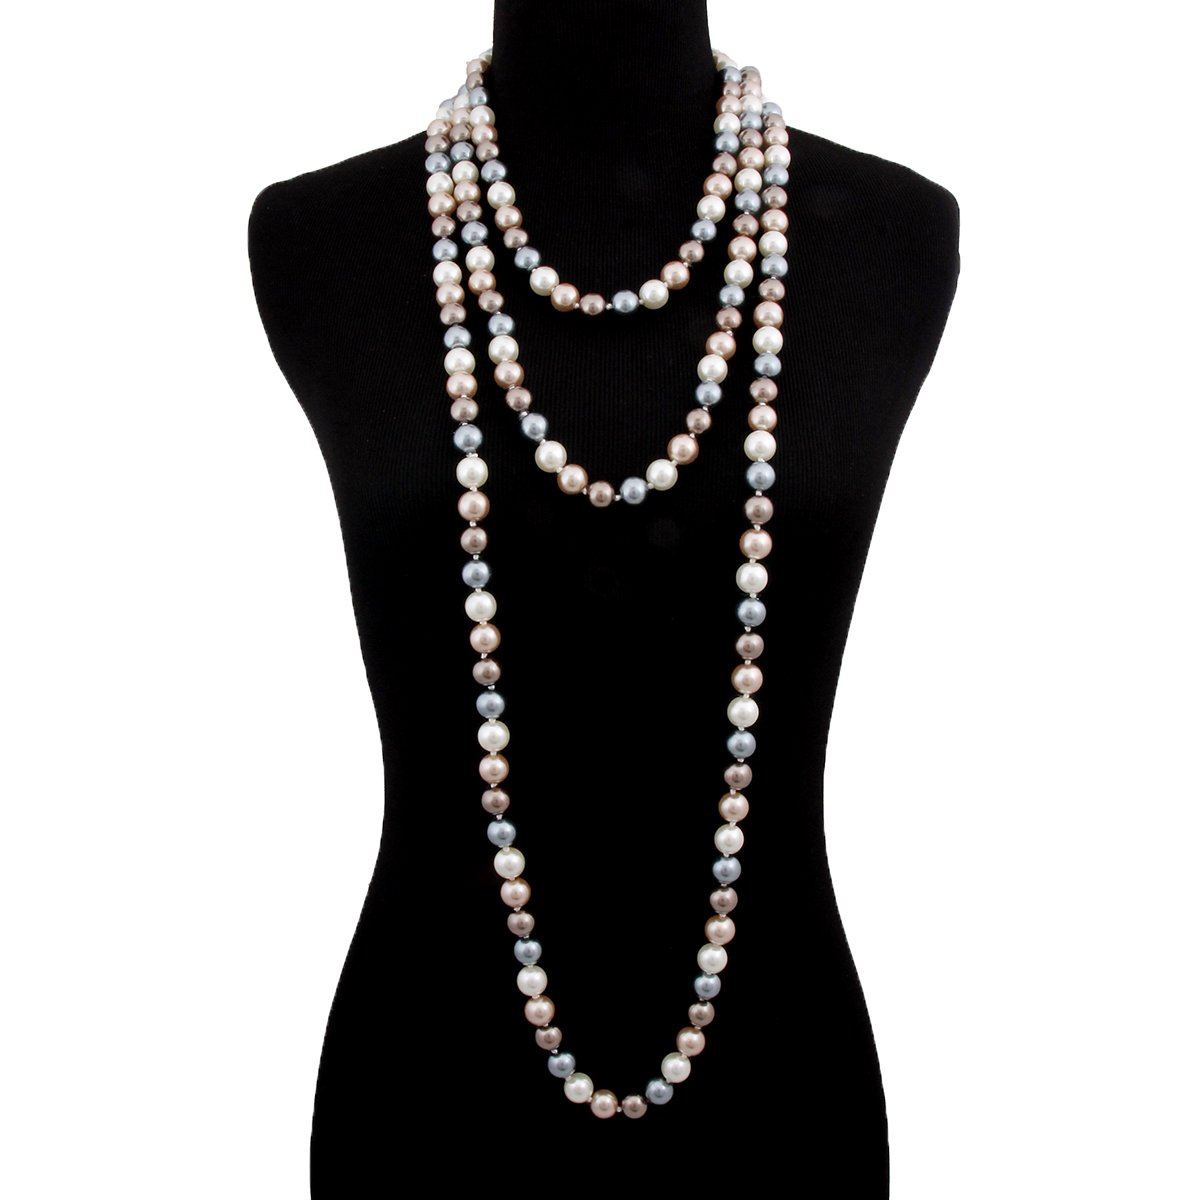 Gold, Cream, and Gray Glass Pearls Coco Designer Style Endless Necklace